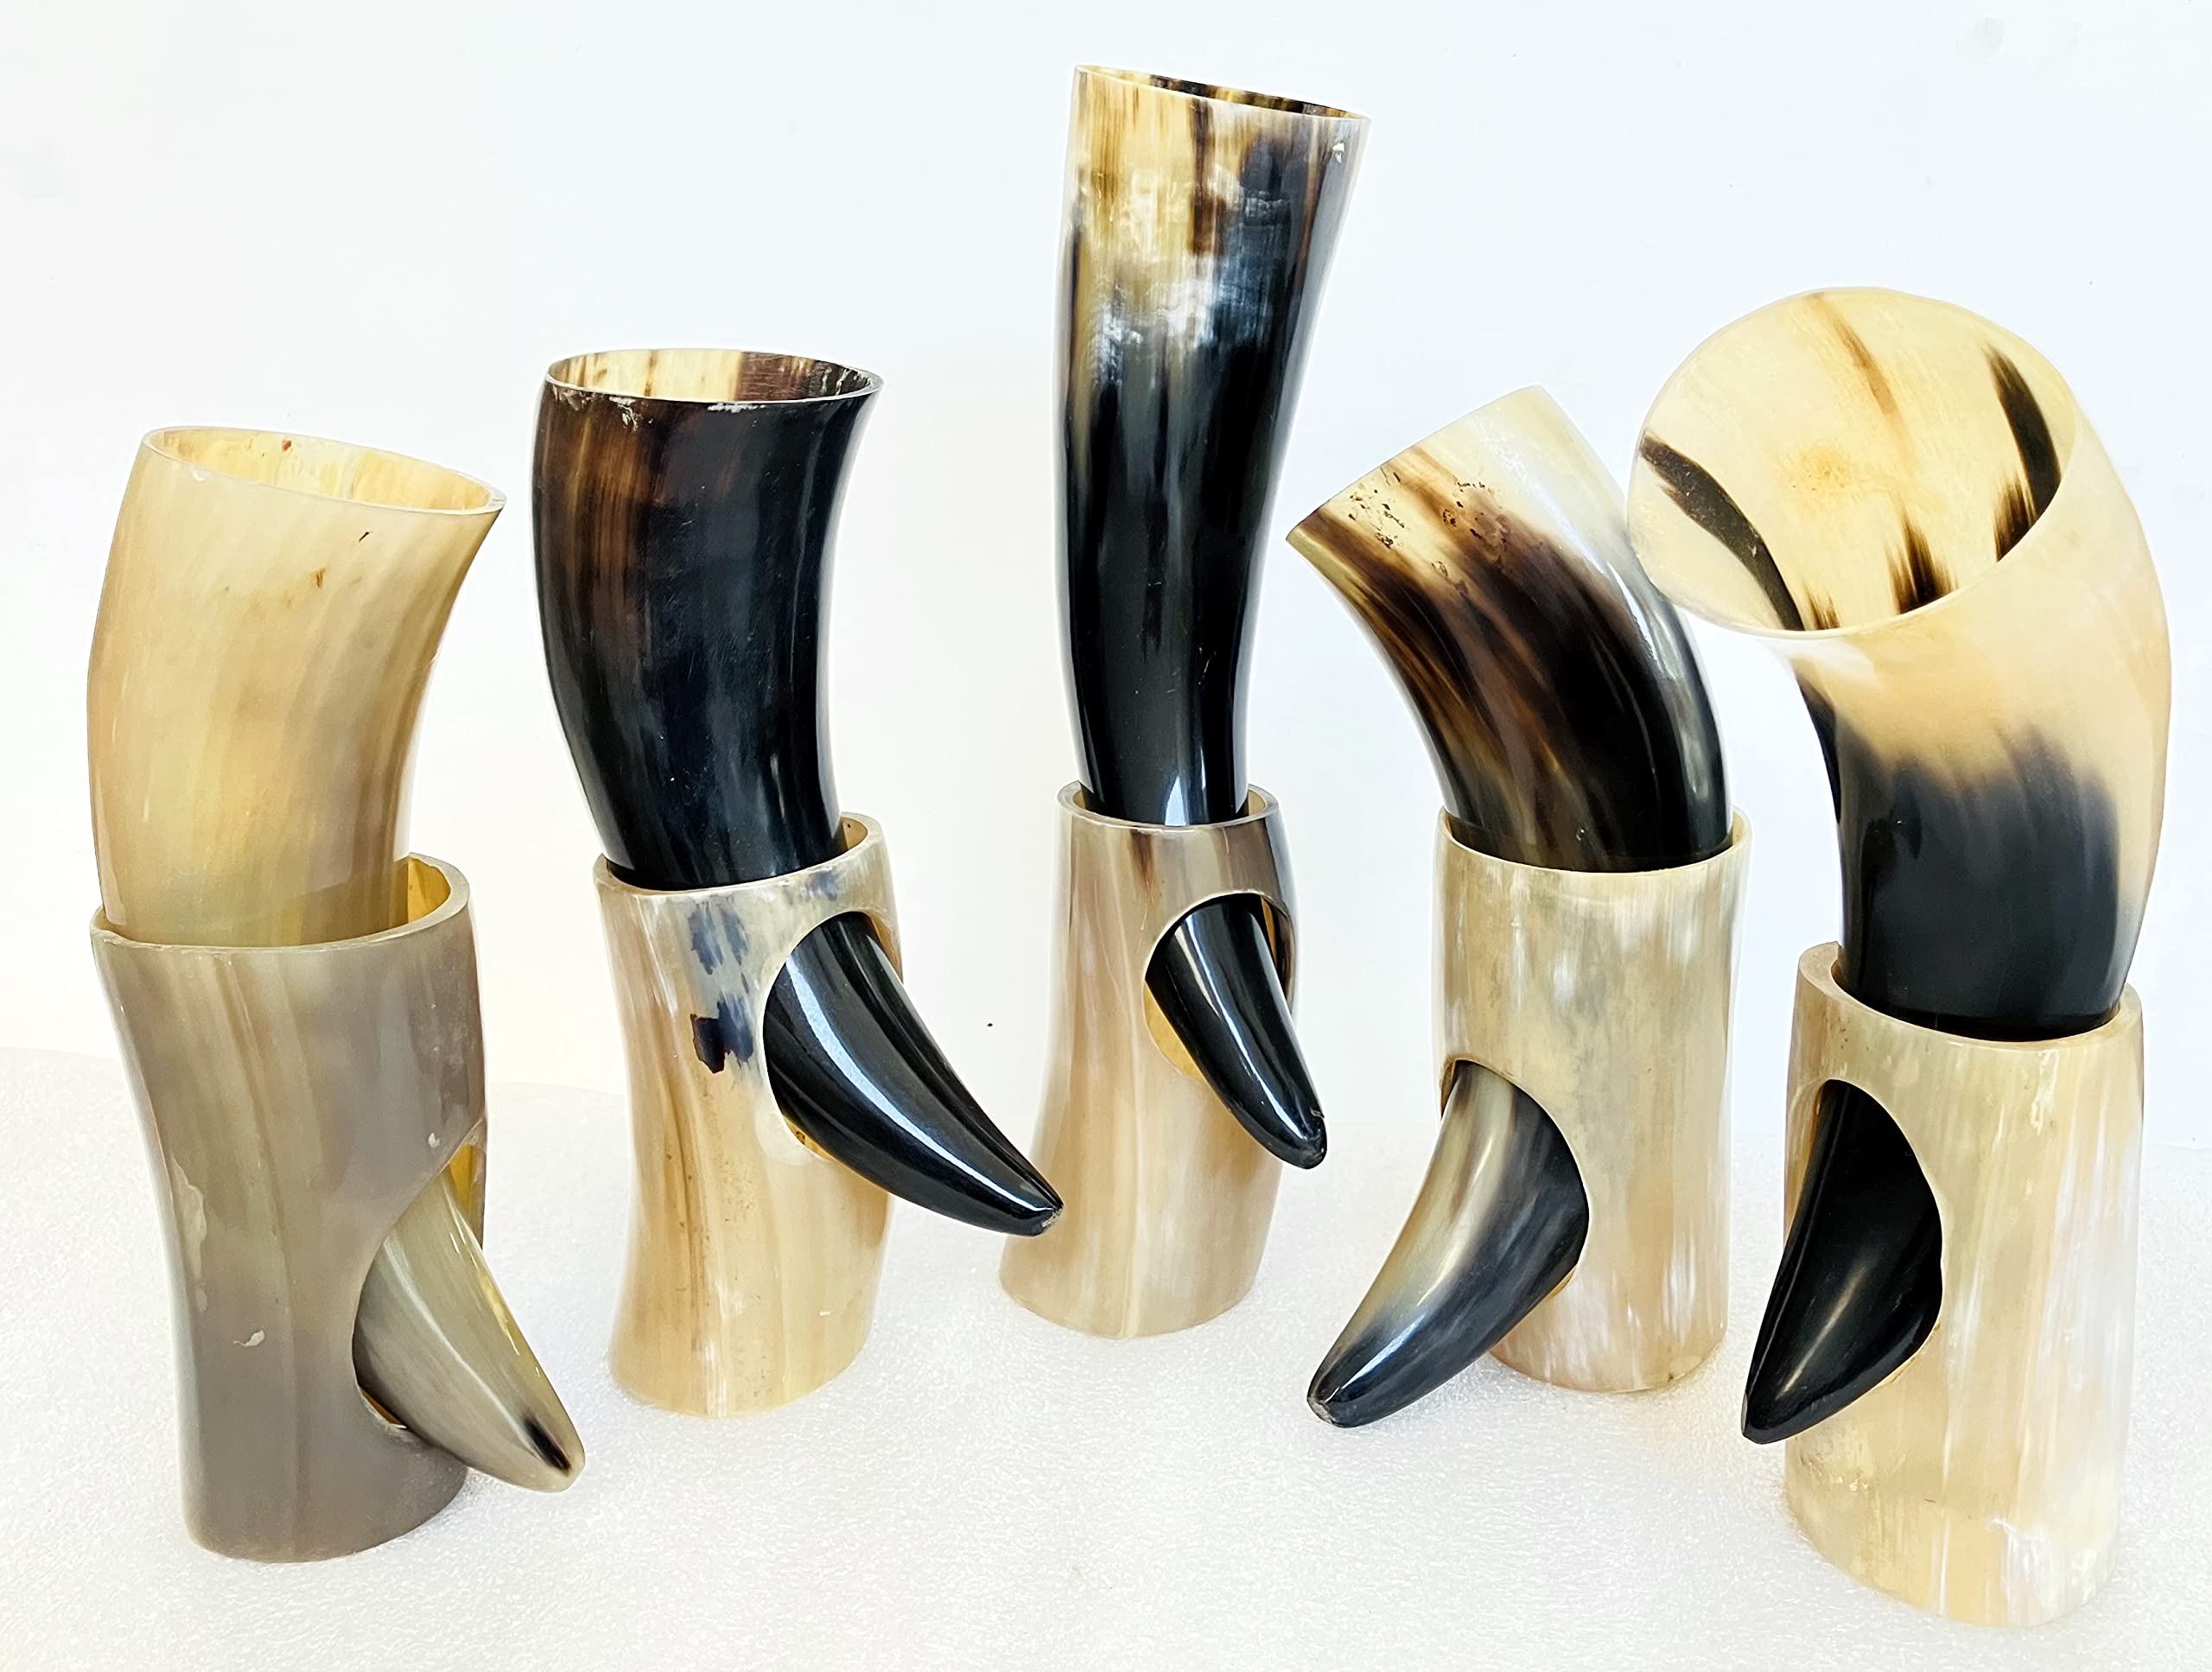 5x Viking Drinking Horn Cups | Viking gift for men 100% Natural Norse Goblet Ale Mead Beer mug Wine with Stand 10oz (9"-12")